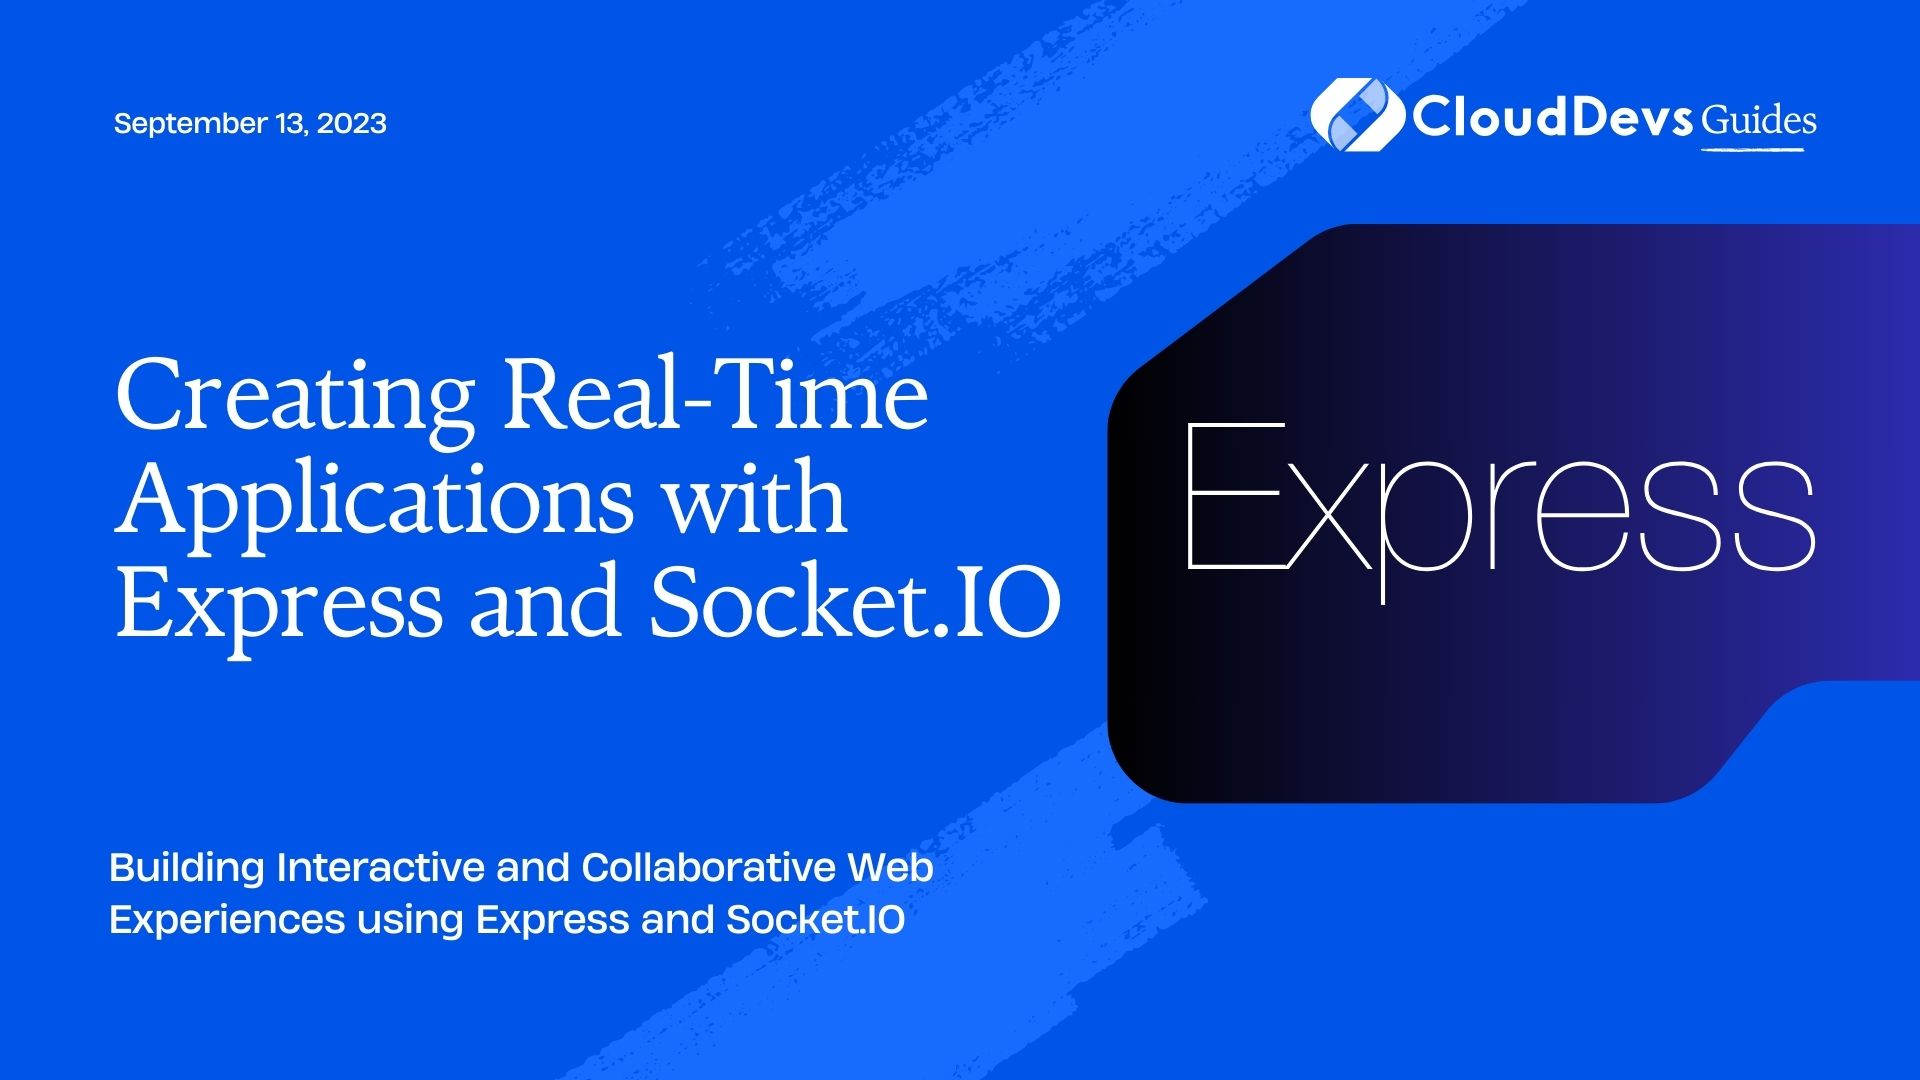 Creating Real-Time Applications with Express and Socket.IO